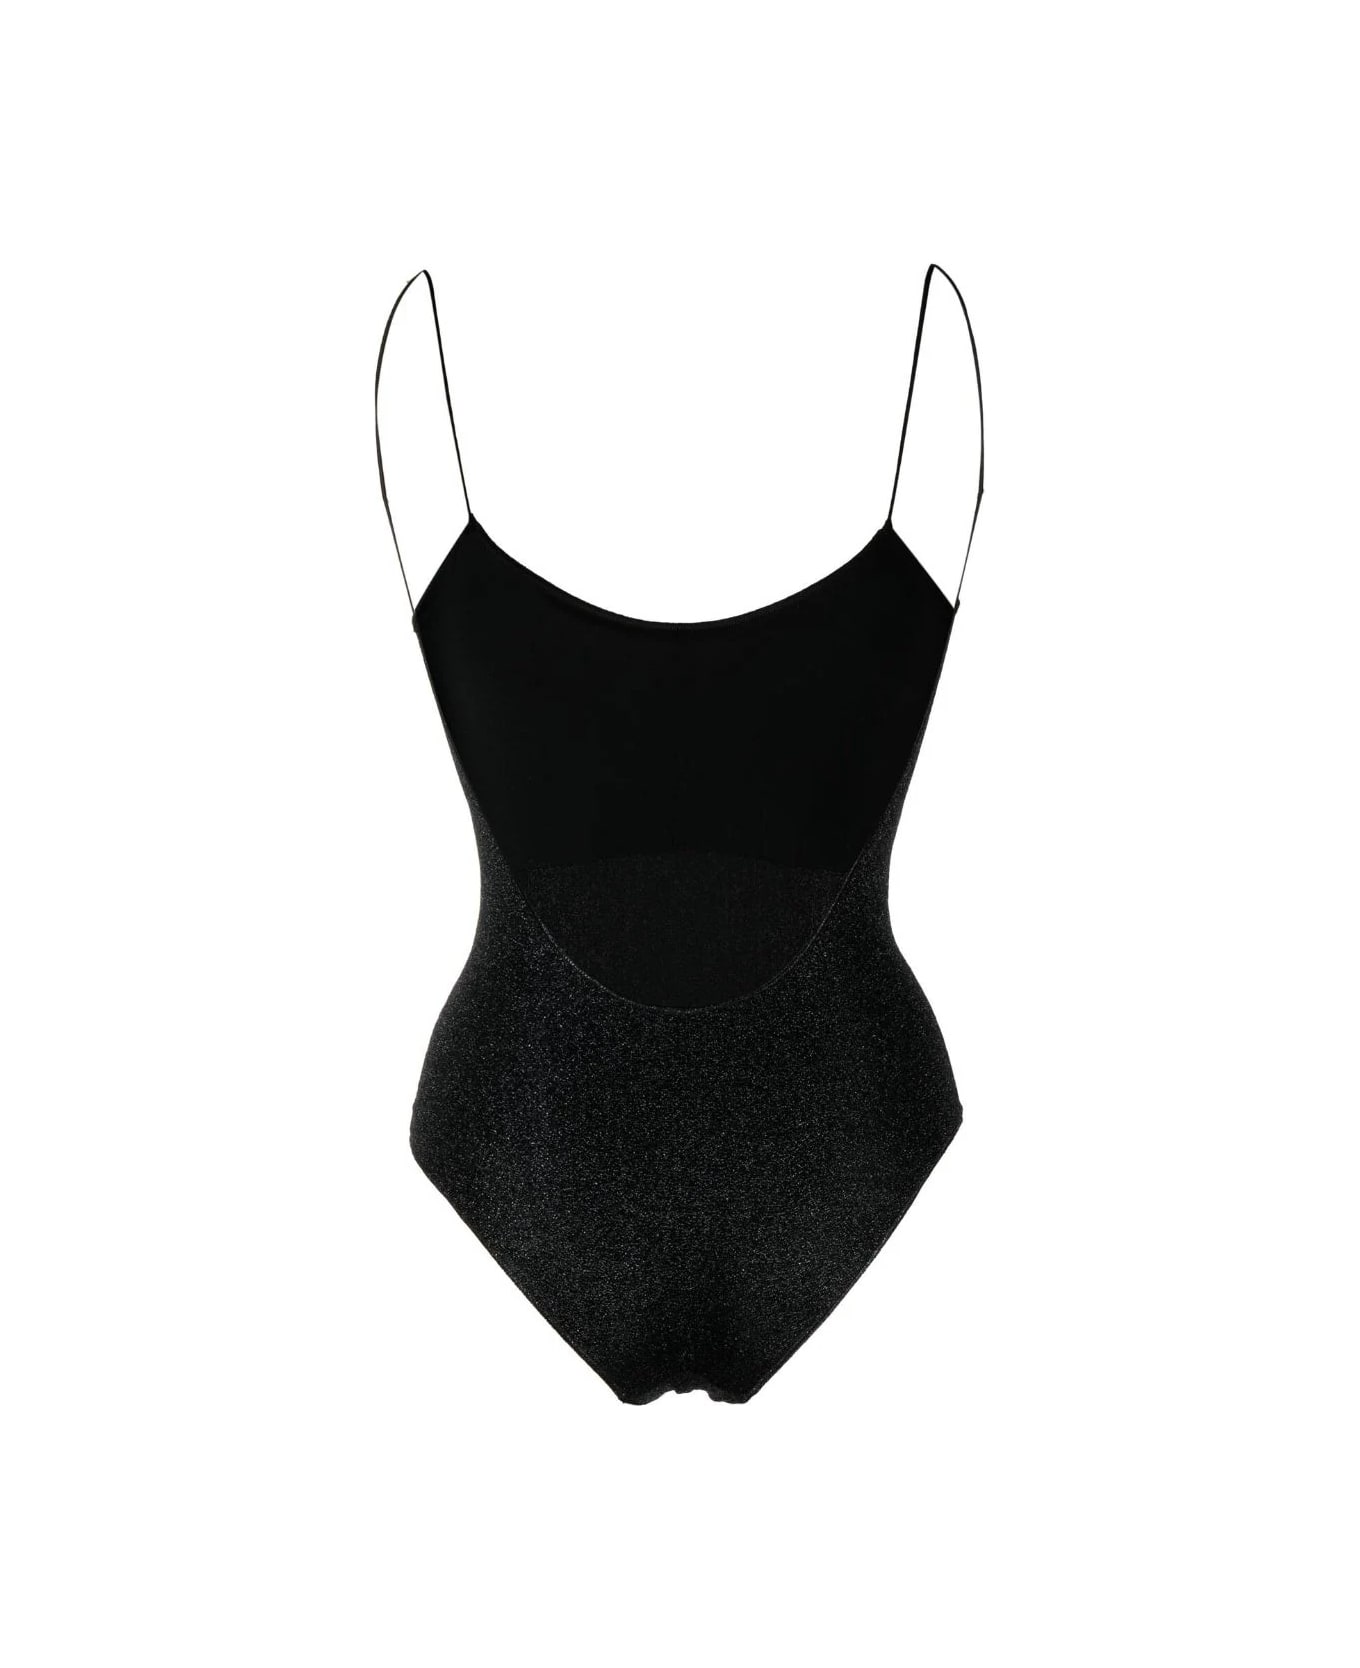 Oseree Black Lumiere Maillot One-piece Swimsuit - Black ワンピース